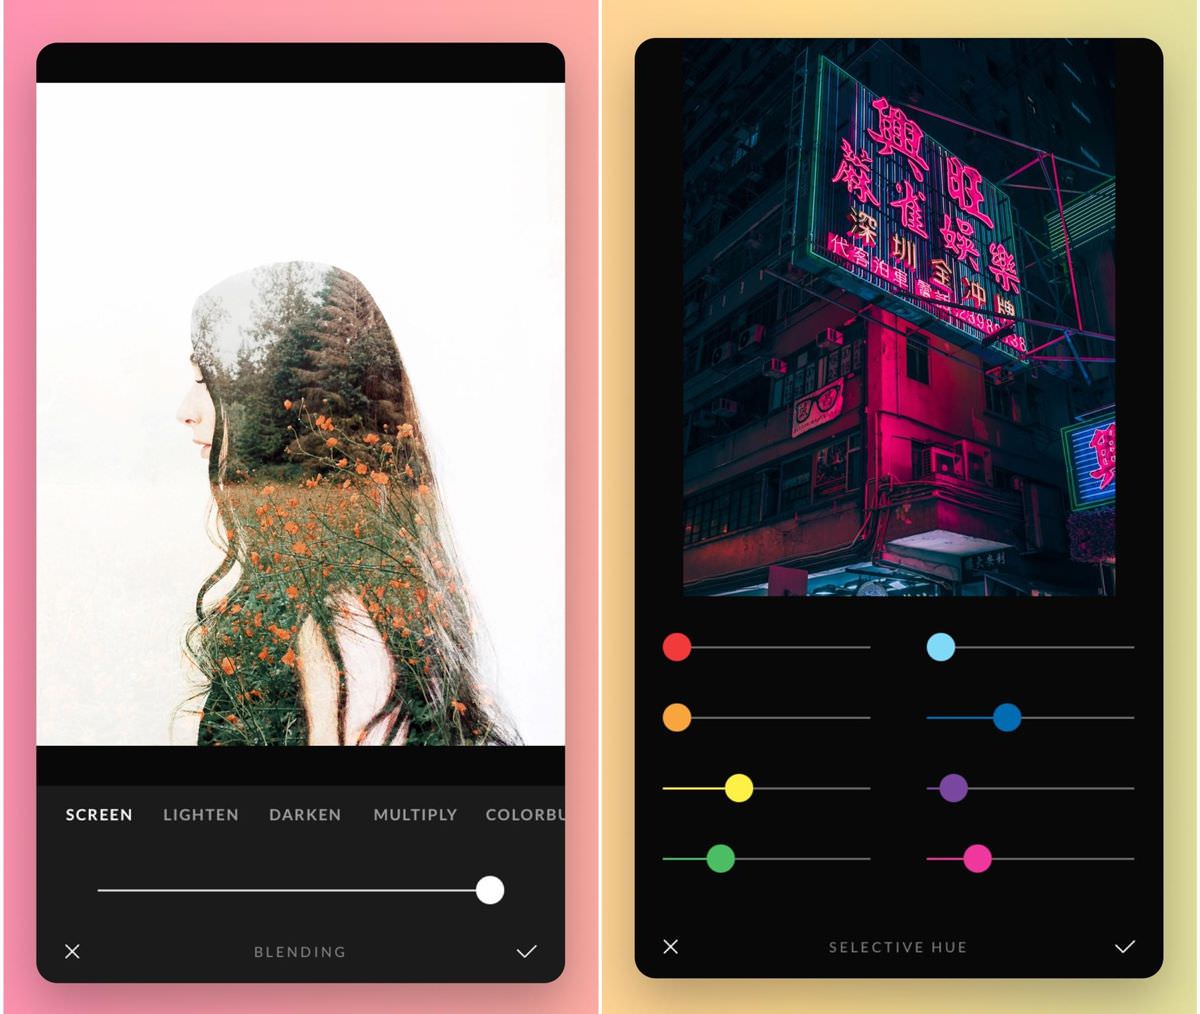 Afterlight - an image-editing app for iOS